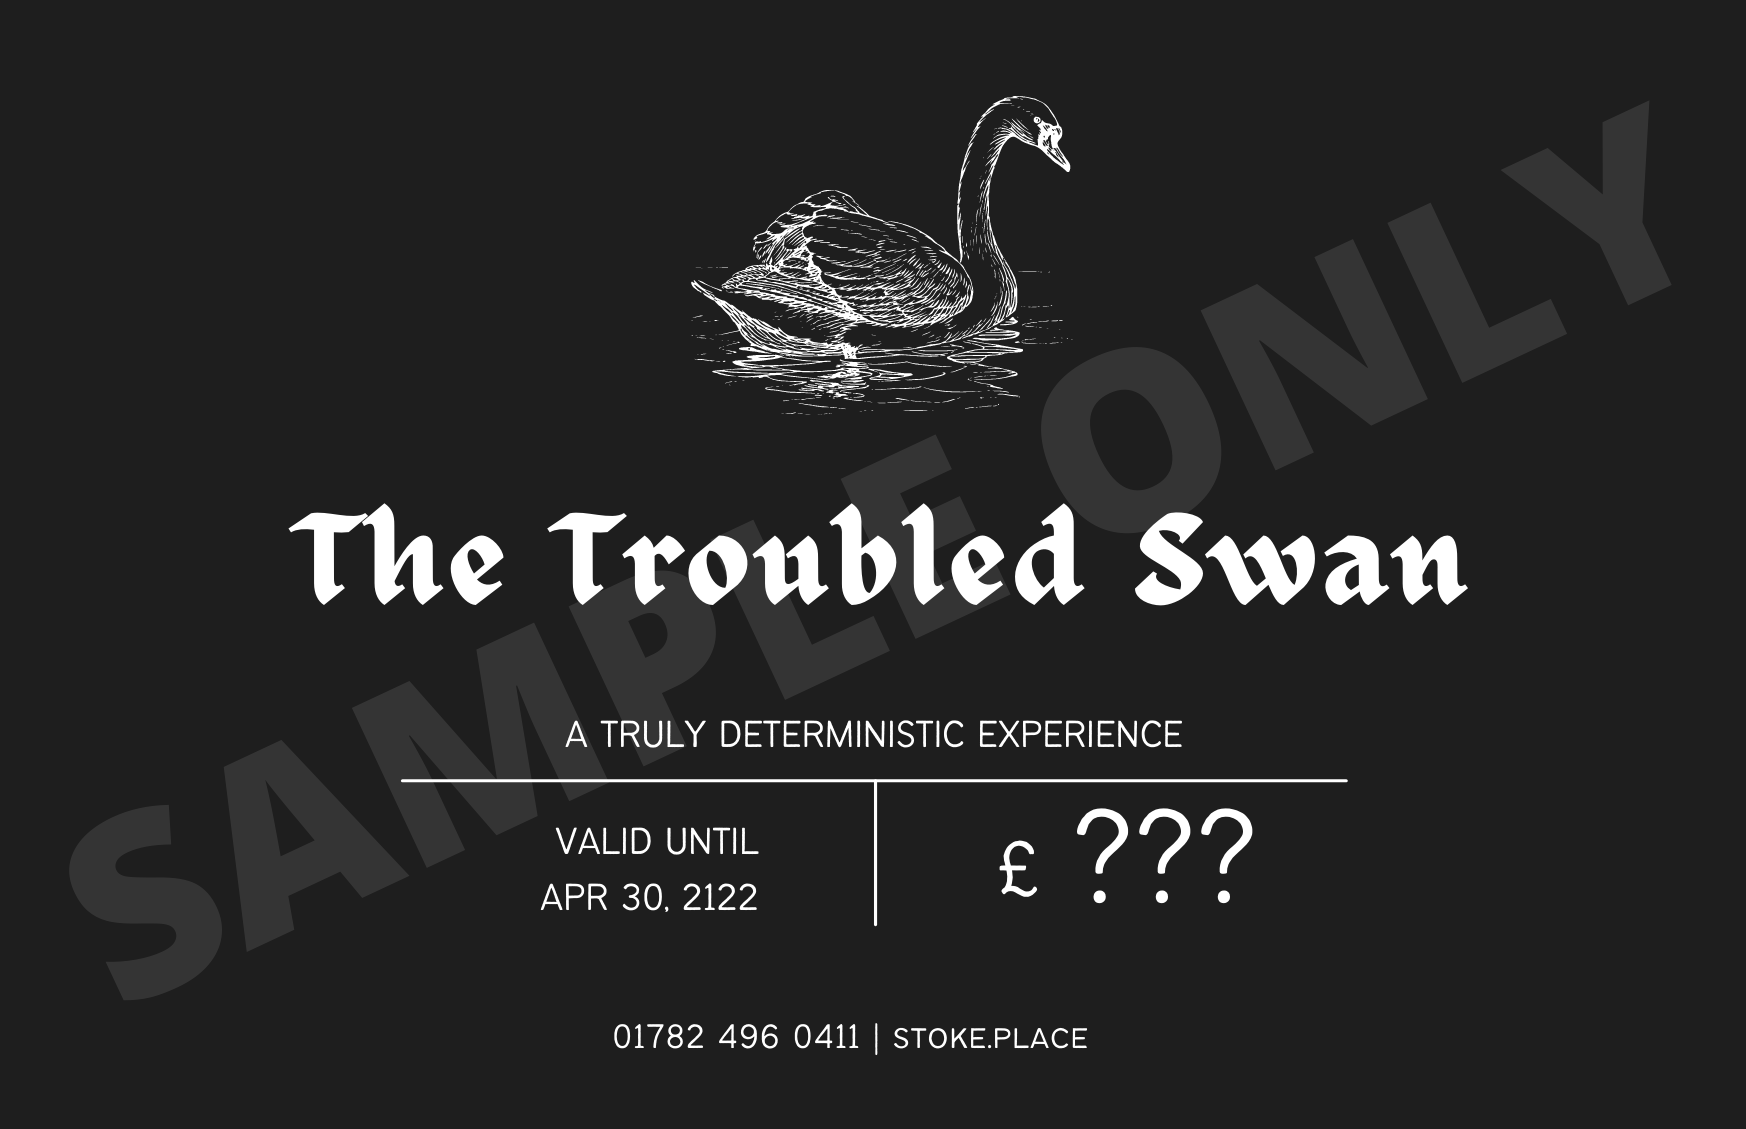 The Troubled Swan gift voucher